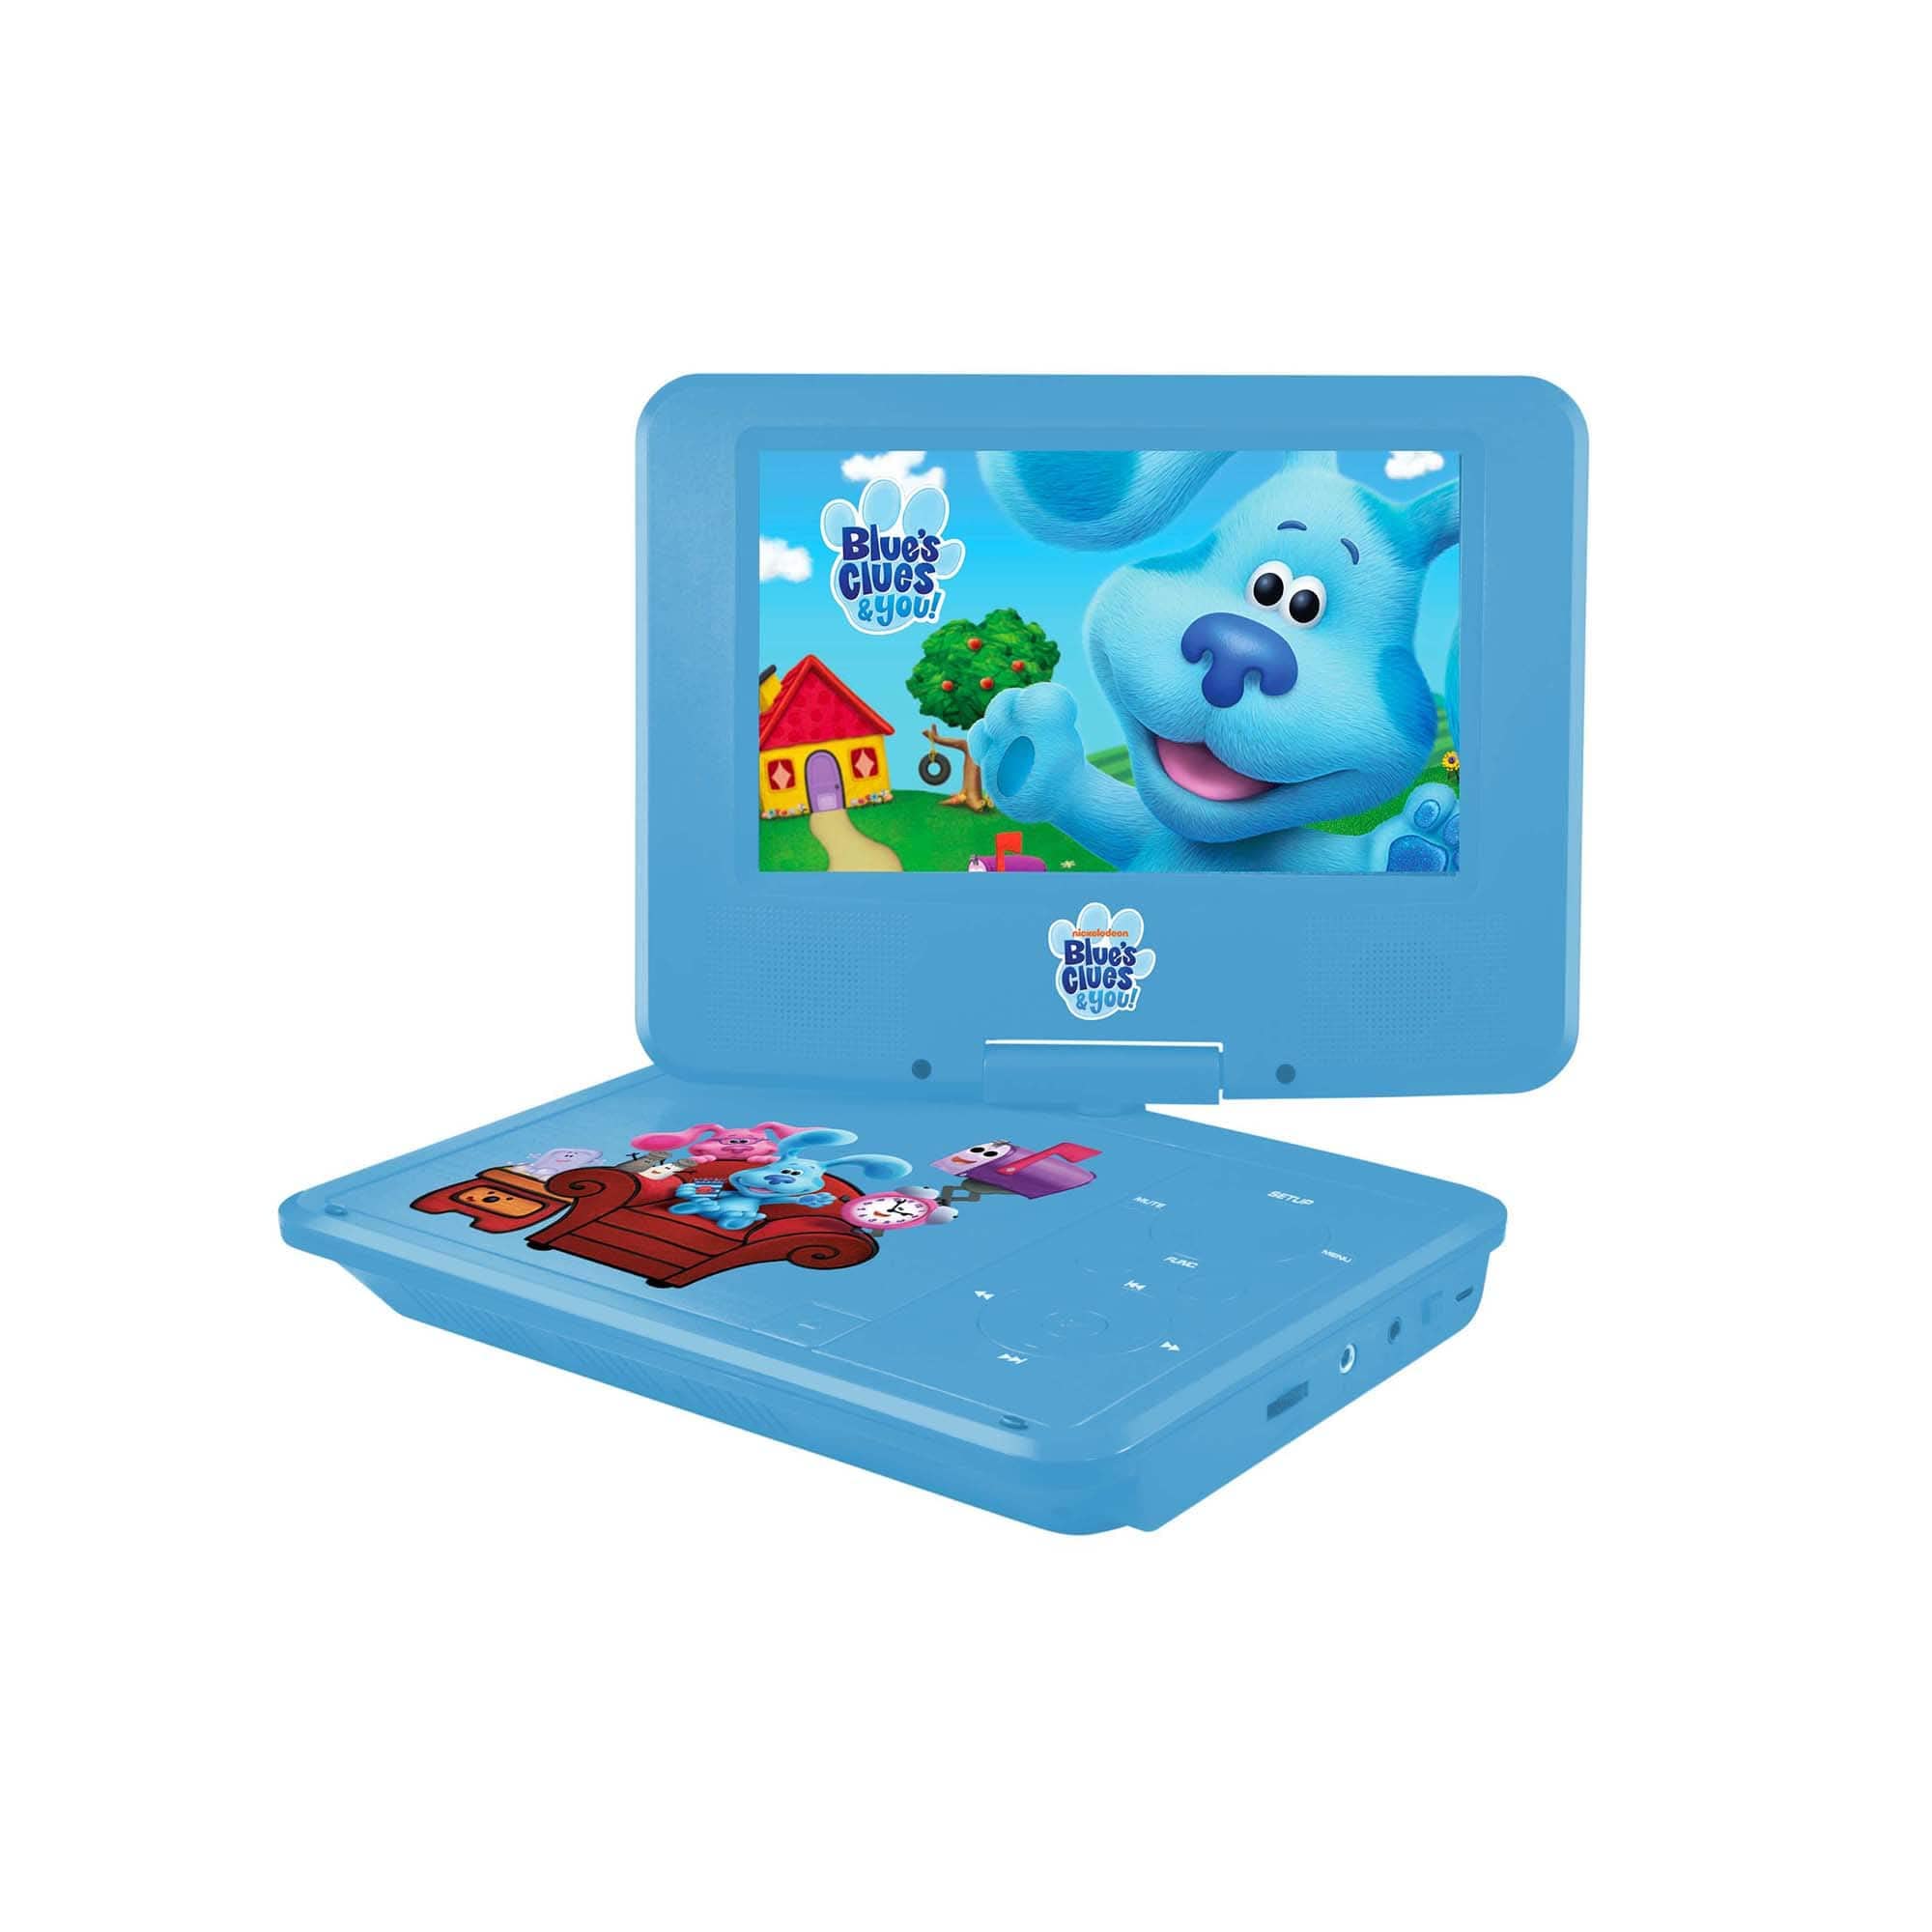 Blue's Clues & You! 7'' Portable DVD Player for Kids with Matching Headphones and Carrying Bag, Compatible with CDs, DVDs, USB and SD Card, Swivel Screen (BCDV7110)